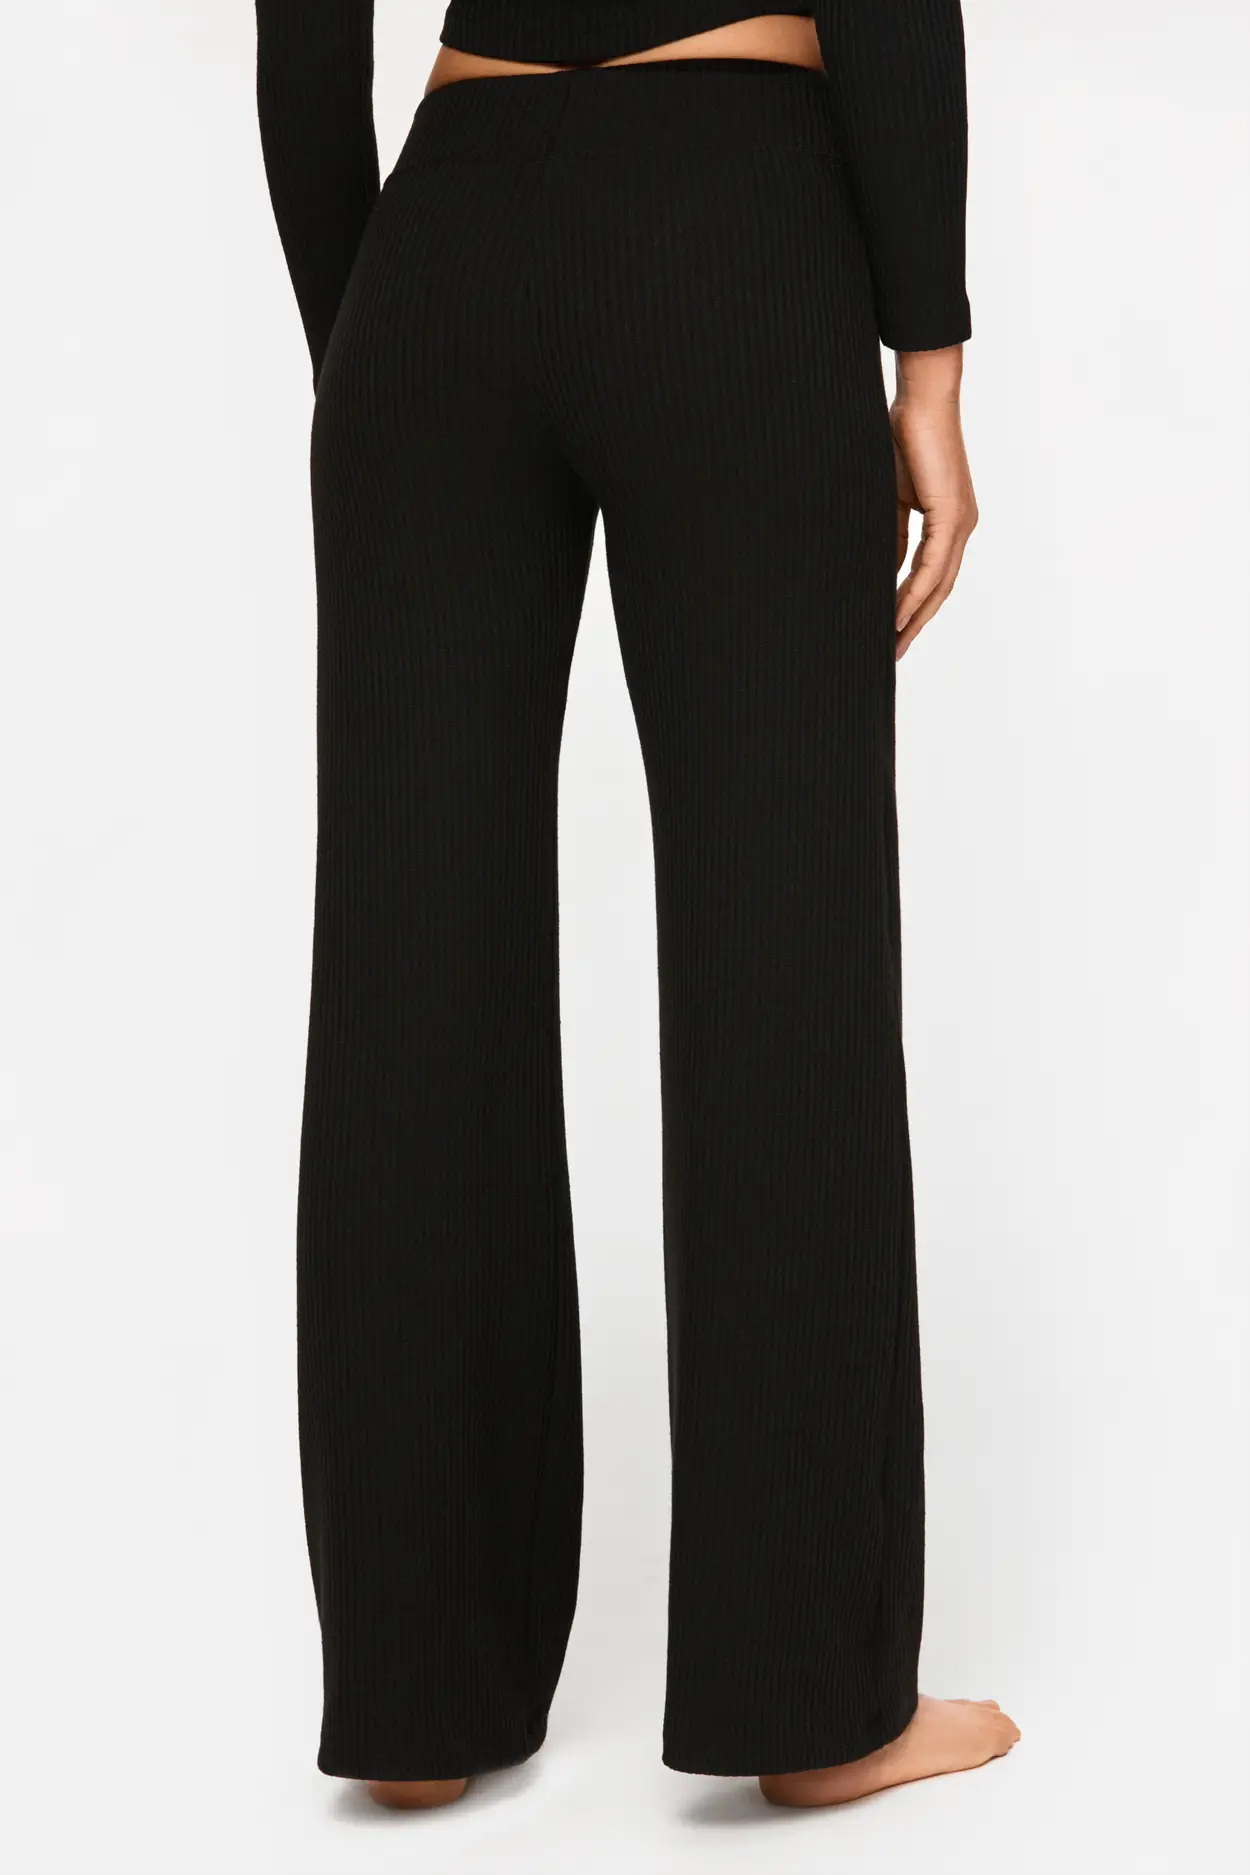 Palazzo Pants Polyester High Waist Pants at Rs 1000/piece in New